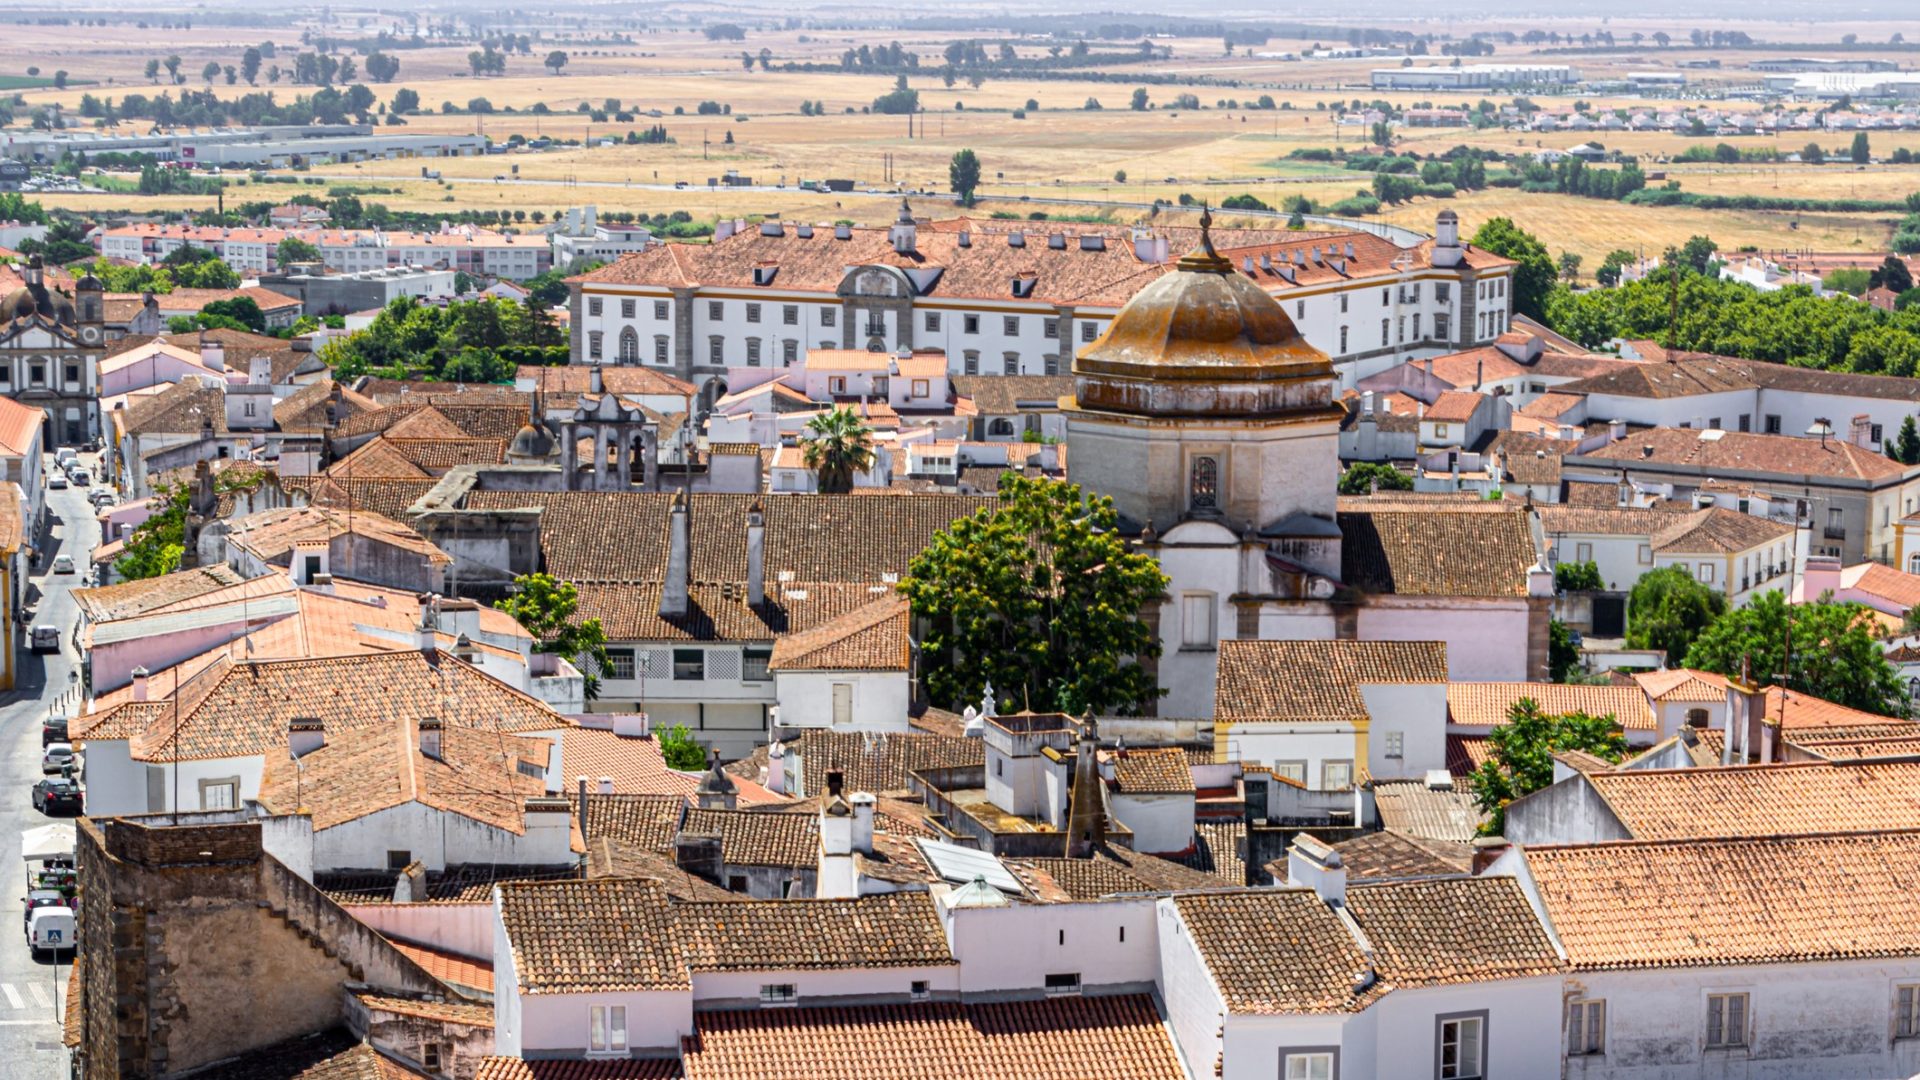 <ul> <li><strong>Average home price:</strong> $405,390</li> </ul> <p>Another of Portugal's charming UNESCO World Heritage Sites, Évora is another city with more than its share of historical significance. </p> <p>A leisurely stroll through its delightfully narrow, maze-like cobblestone streets will show you a fascinating blend of Roman ruins, medieval churches and quintessential whitewashed houses. The Roman Temple is sure to evoke a sense of awe, while the eerie beauty of the Chapel of Bones offers a beautiful, if somewhat grim, reflection on the impermanence of life. </p> <p>Make time to wander through the city's lovely and captivating squares, where life goes on against the backdrop of ancient history. </p>